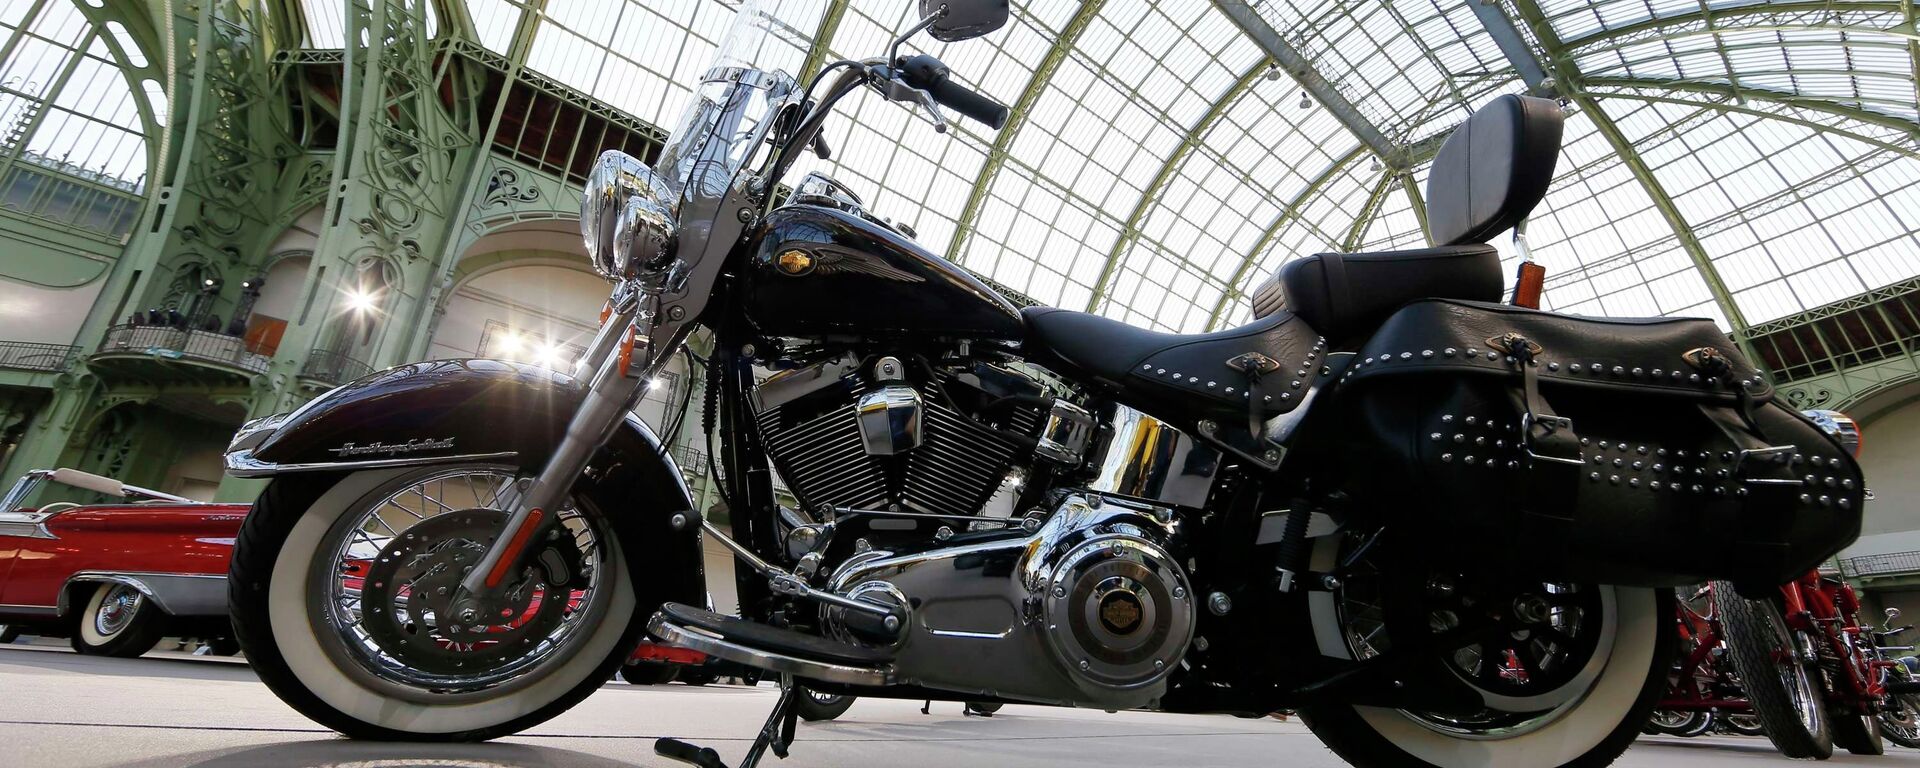 A Harley-Davidson motorcycle blessed with the signature of Emeritus Pope Benedict XVI, and later received by Pope Francis, is displayed ahead of the Bonhams' Les Grandes Marques du Monde vintage motor cars and motorcycles auction at the Grand Palais exhibition hall as part of the Retromobile vintage car show in Paris February 4, 2015 - Sputnik International, 1920, 22.06.2018